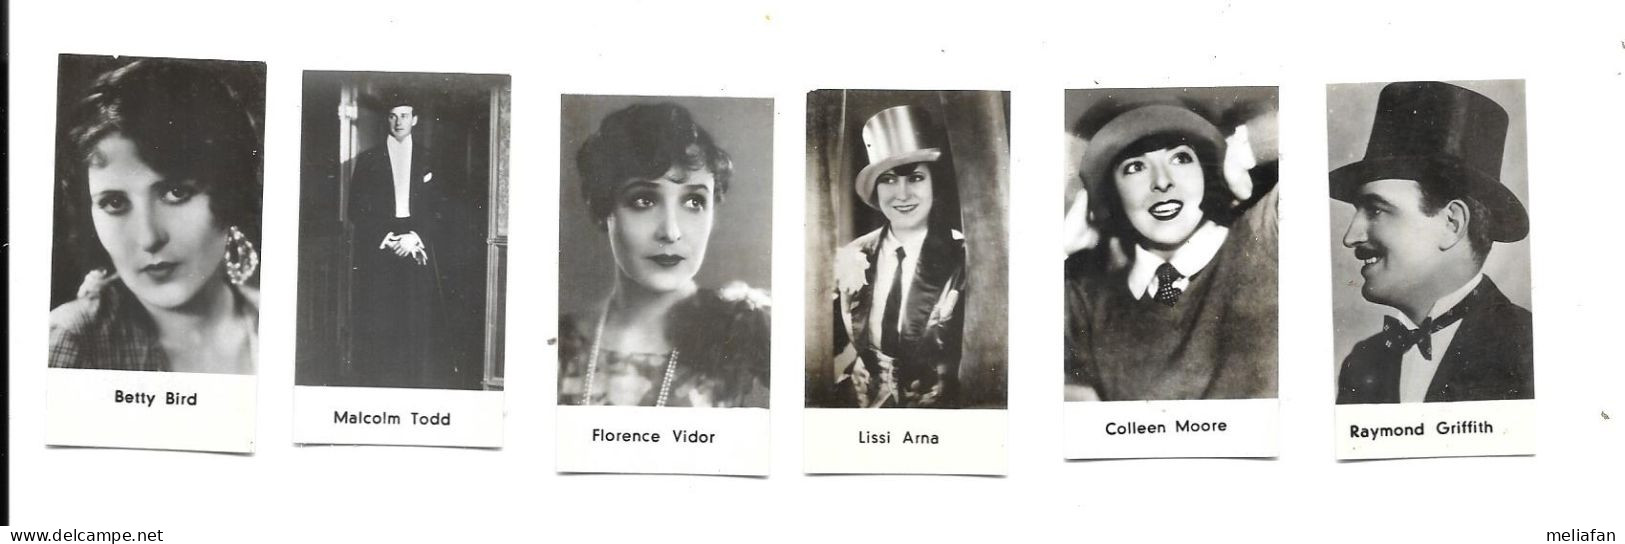 DV06 - VIGNETTES PHOTO - BETTY BIRD - COLLEEN MOORE - LISSI ARNA - RAYMOND GRIFFITH - FLORENCE VIDOR - MALCOLM TODD - Photographs